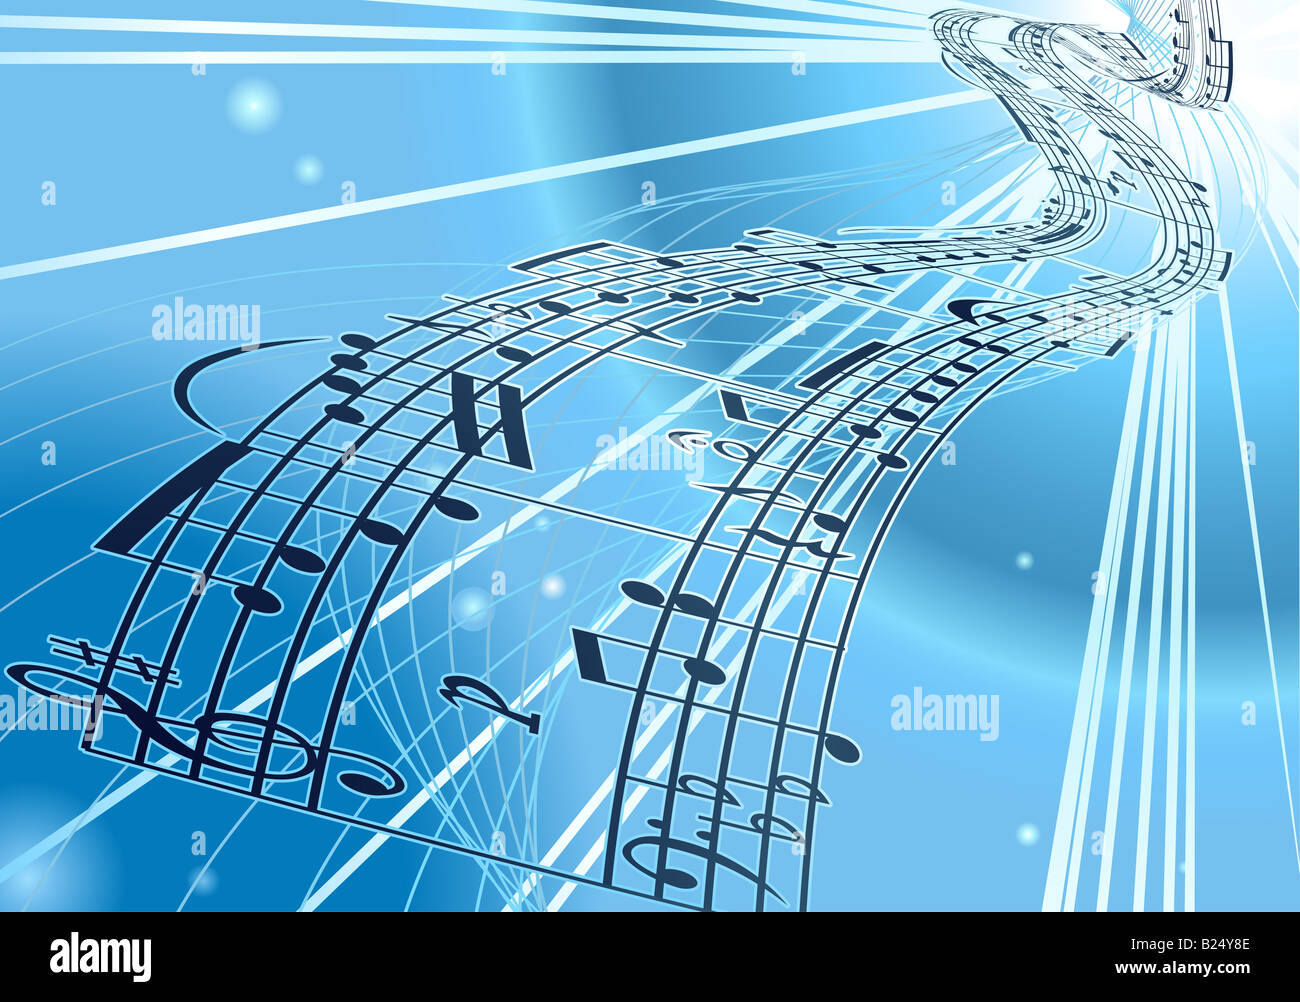 An abstract music notes background with flowing a ribbon of a musical notes score Stock Photo